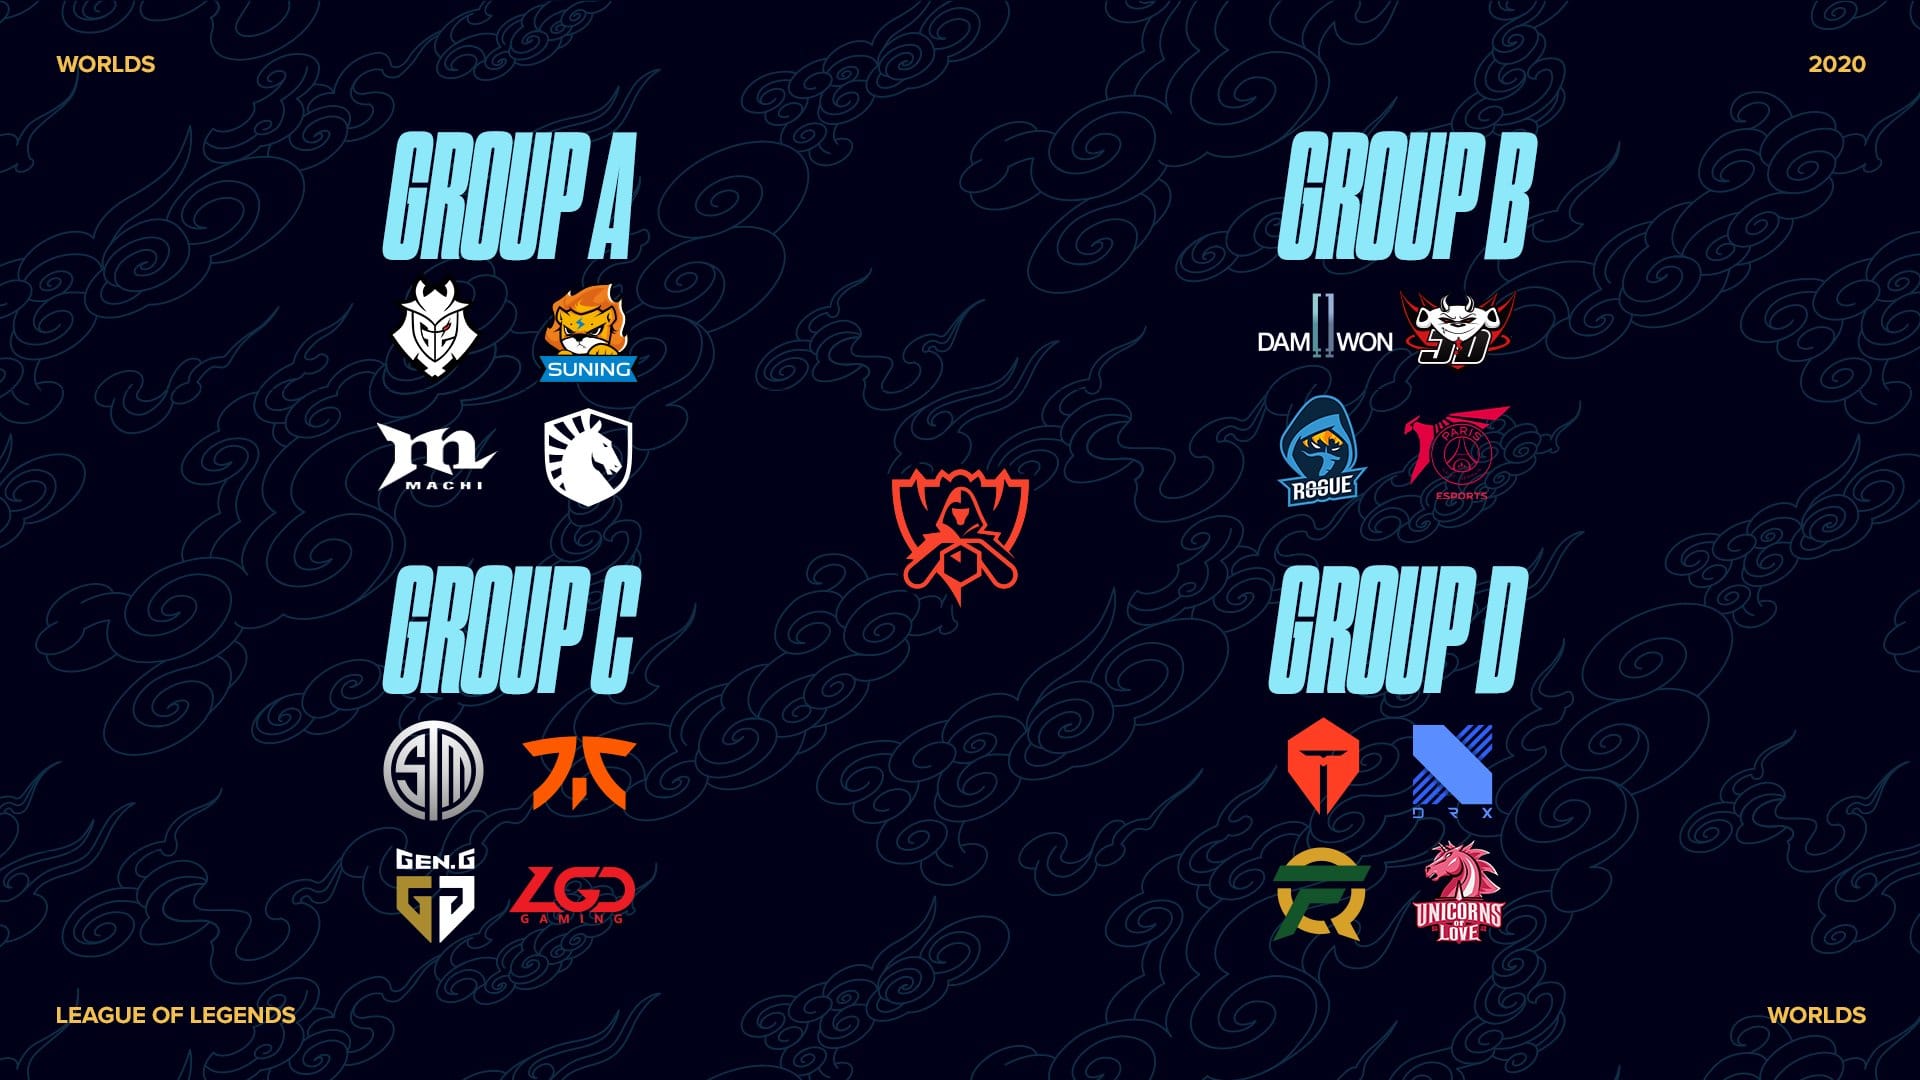 LoL Worlds 2020 Overview, Groups & Schedule